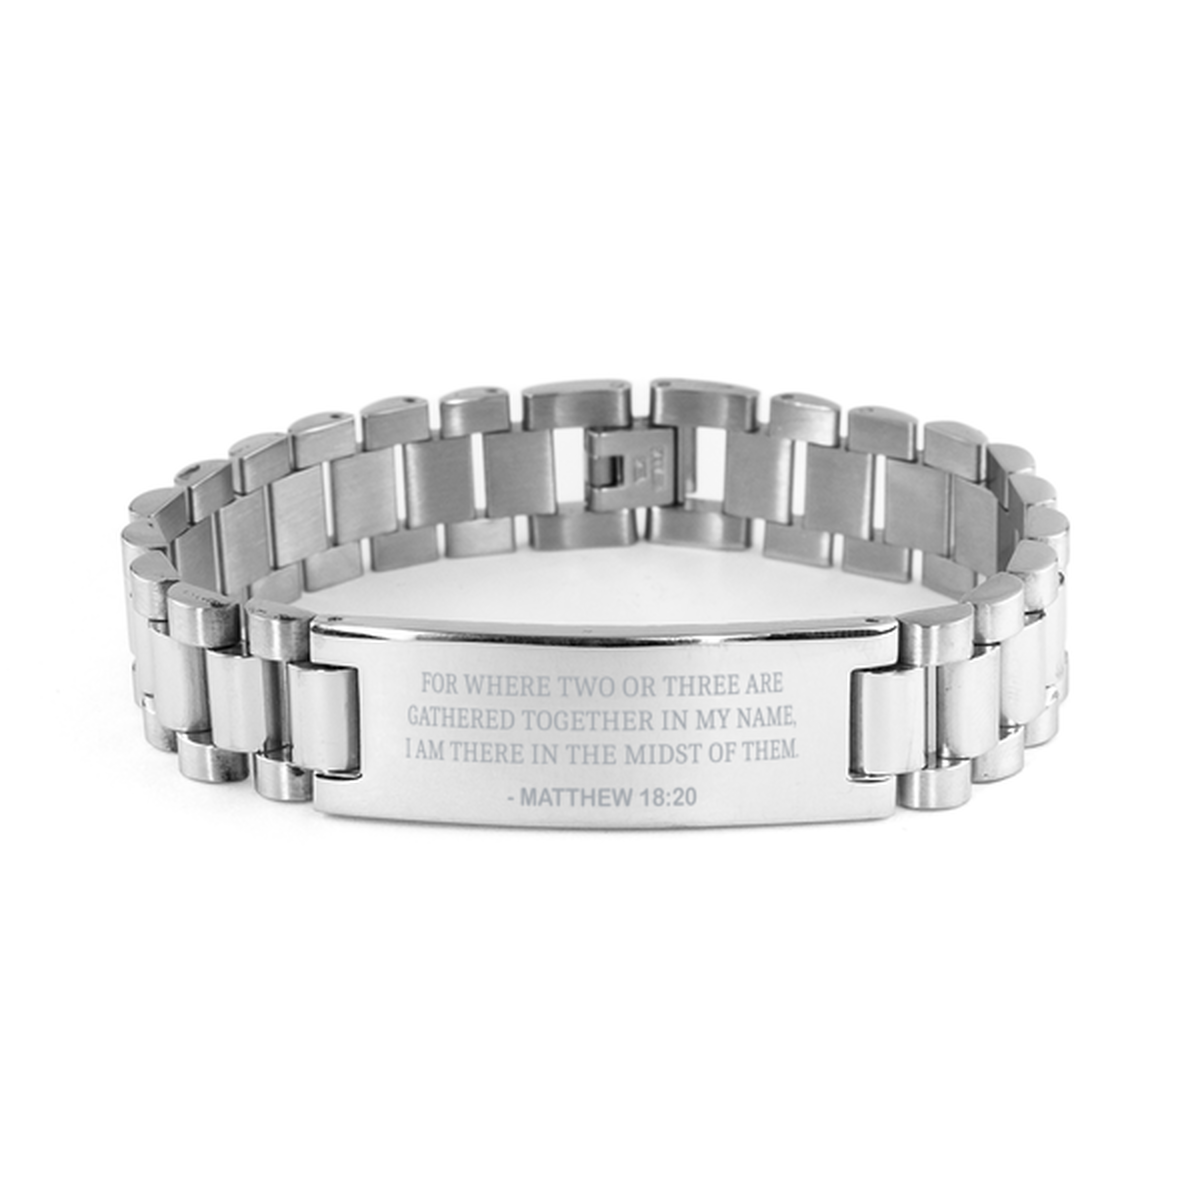 Christian Ladder Stainless Steel Bracelet, Matthew 18:20 For Where Two Or Three Are Gathered Together In, Motivational Bible Verse Gifts For Men Women